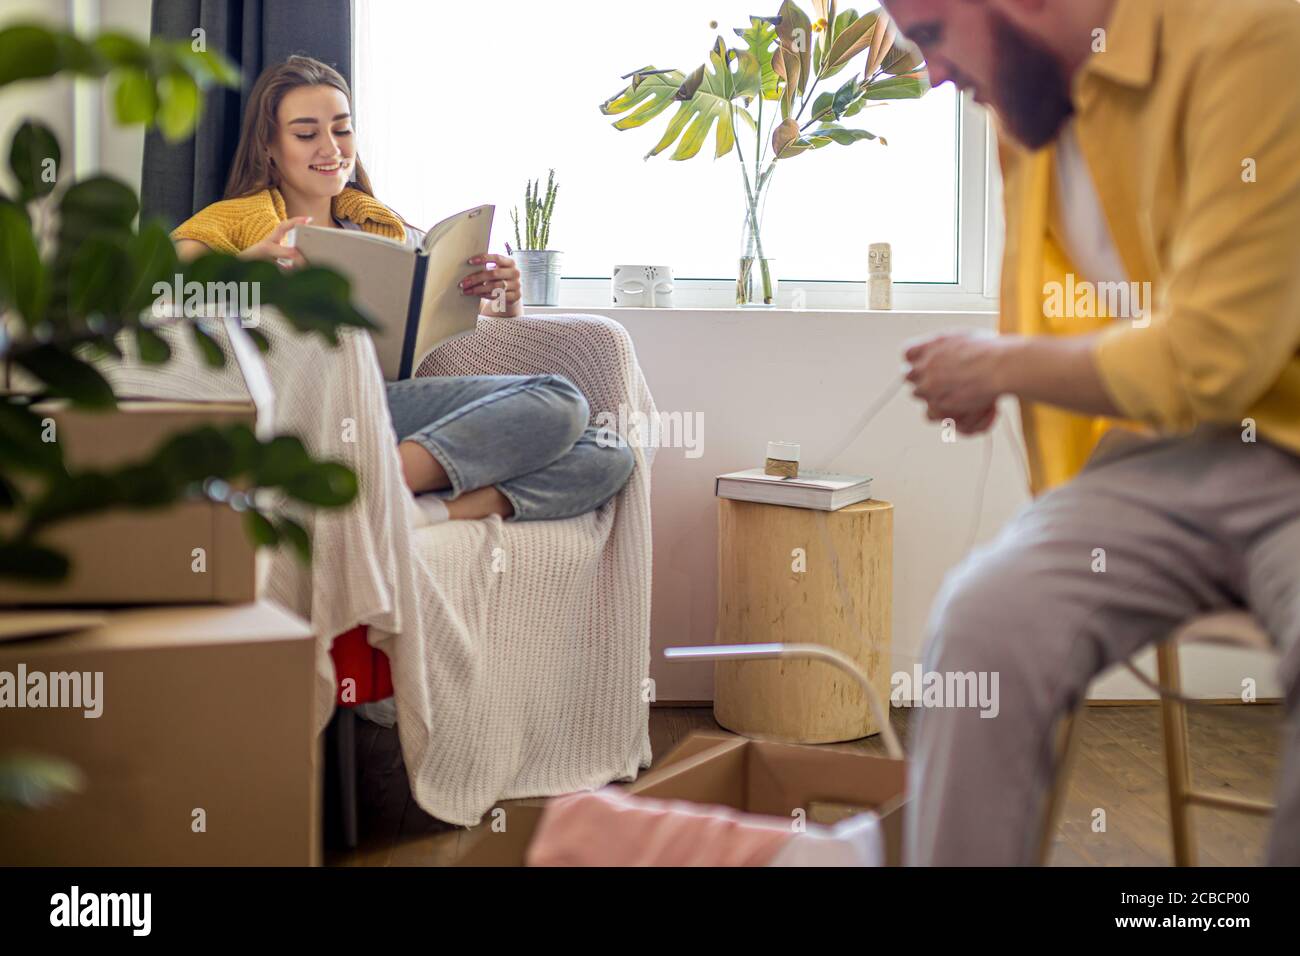 man unpacking cardboard boxes after moving into new house, tired woman have rest, read a book. indoors Stock Photo